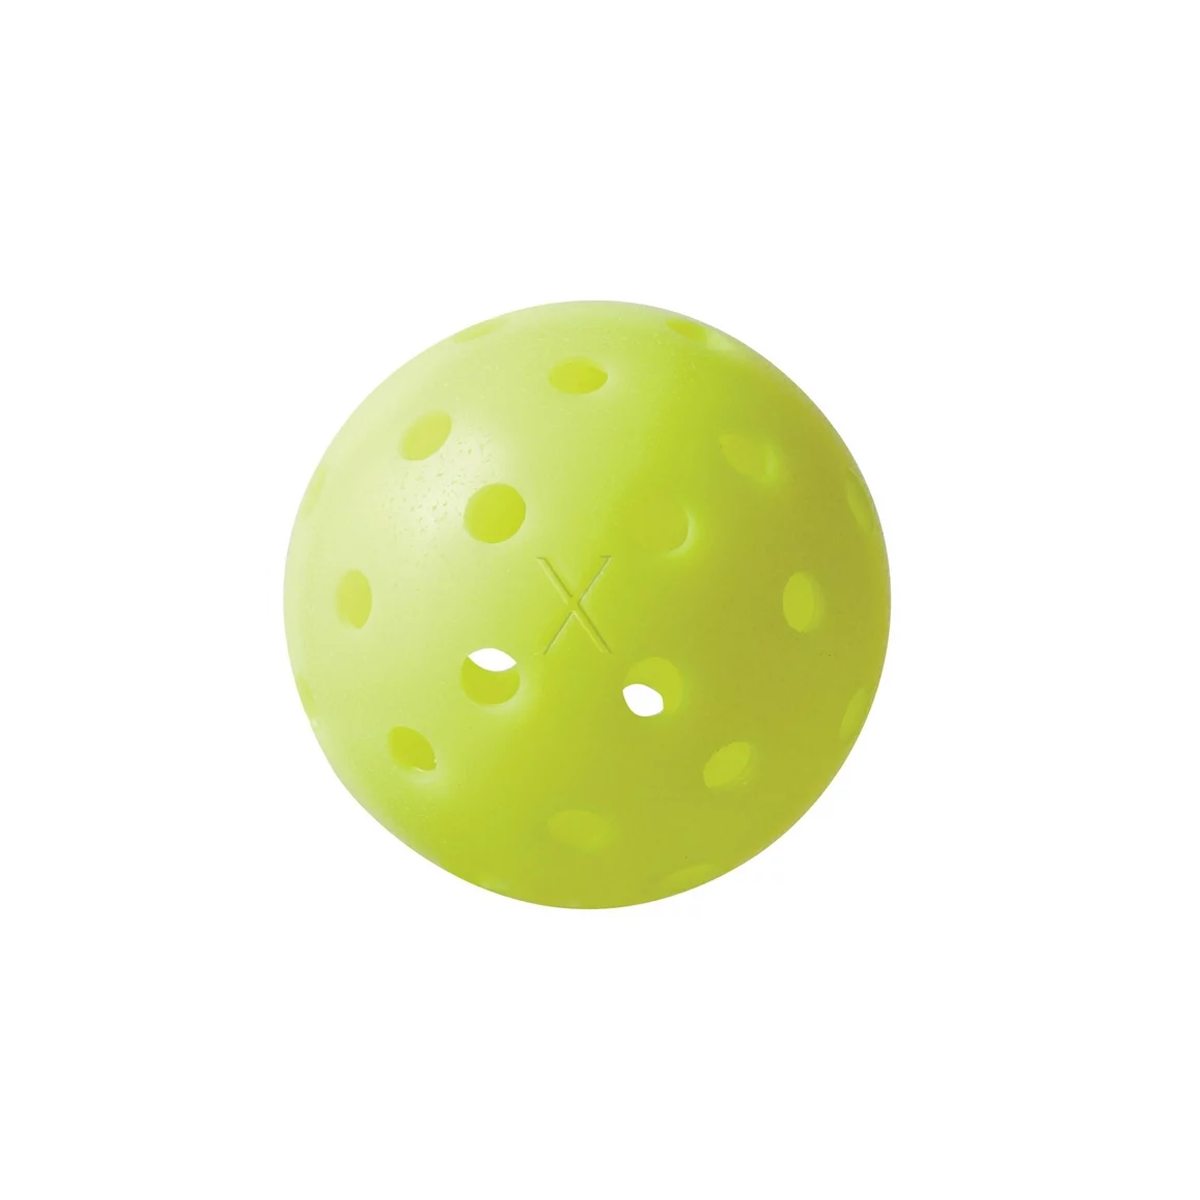 Franklin X-40 Outdoor Pickleball (3 Pack) - Lime Green